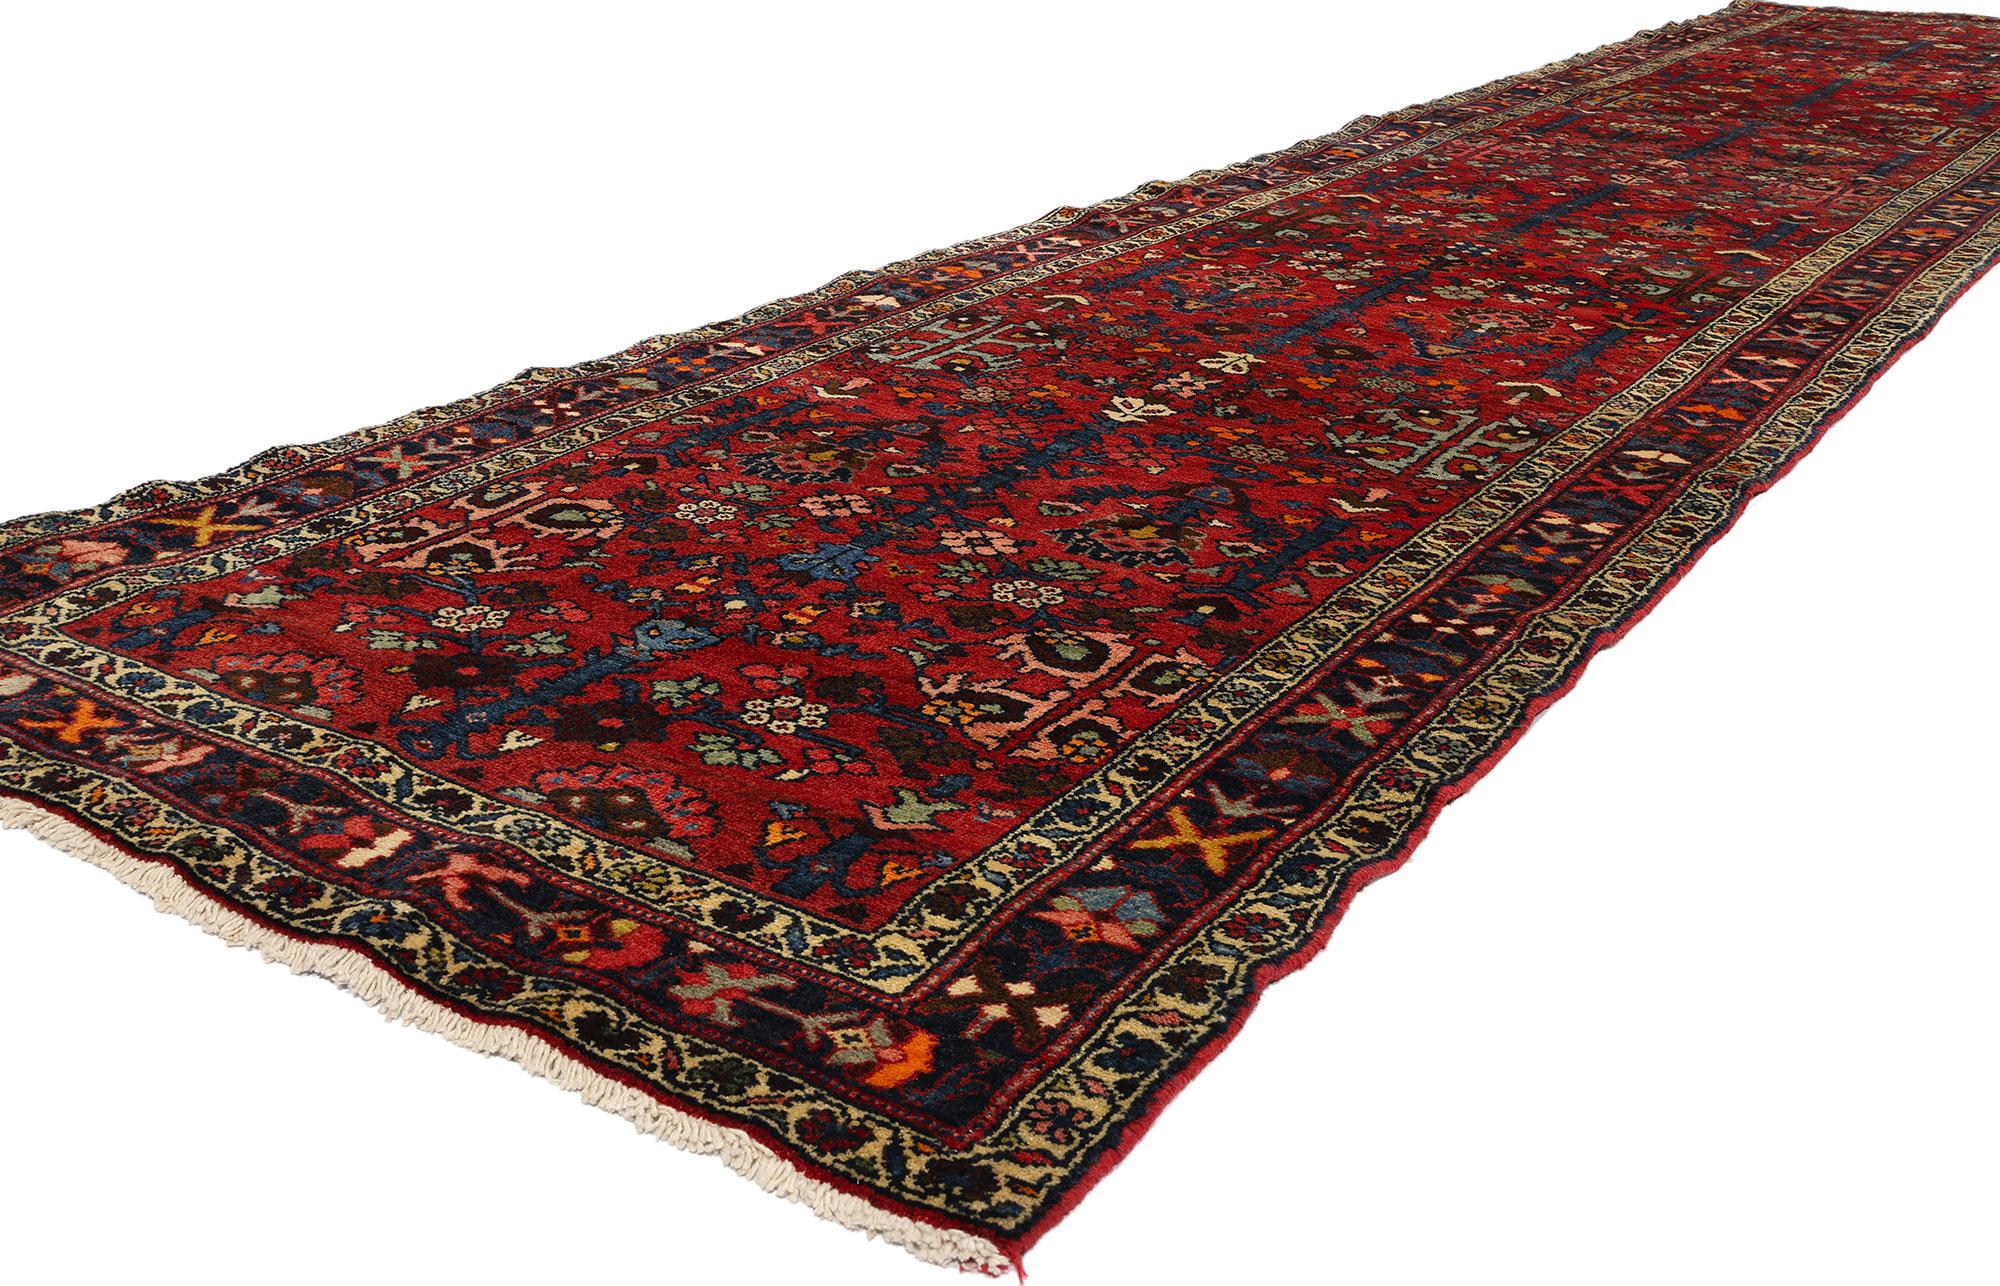 78726 Vintage Red Persian Hamadan Rug Runner, 03'06 x 17'01. Please note this is a listing for only one runner. It does have a matching piece. What distinguishes this rug is its rarity - a cherished relic from the 1940s, a period when Hamadan rugs